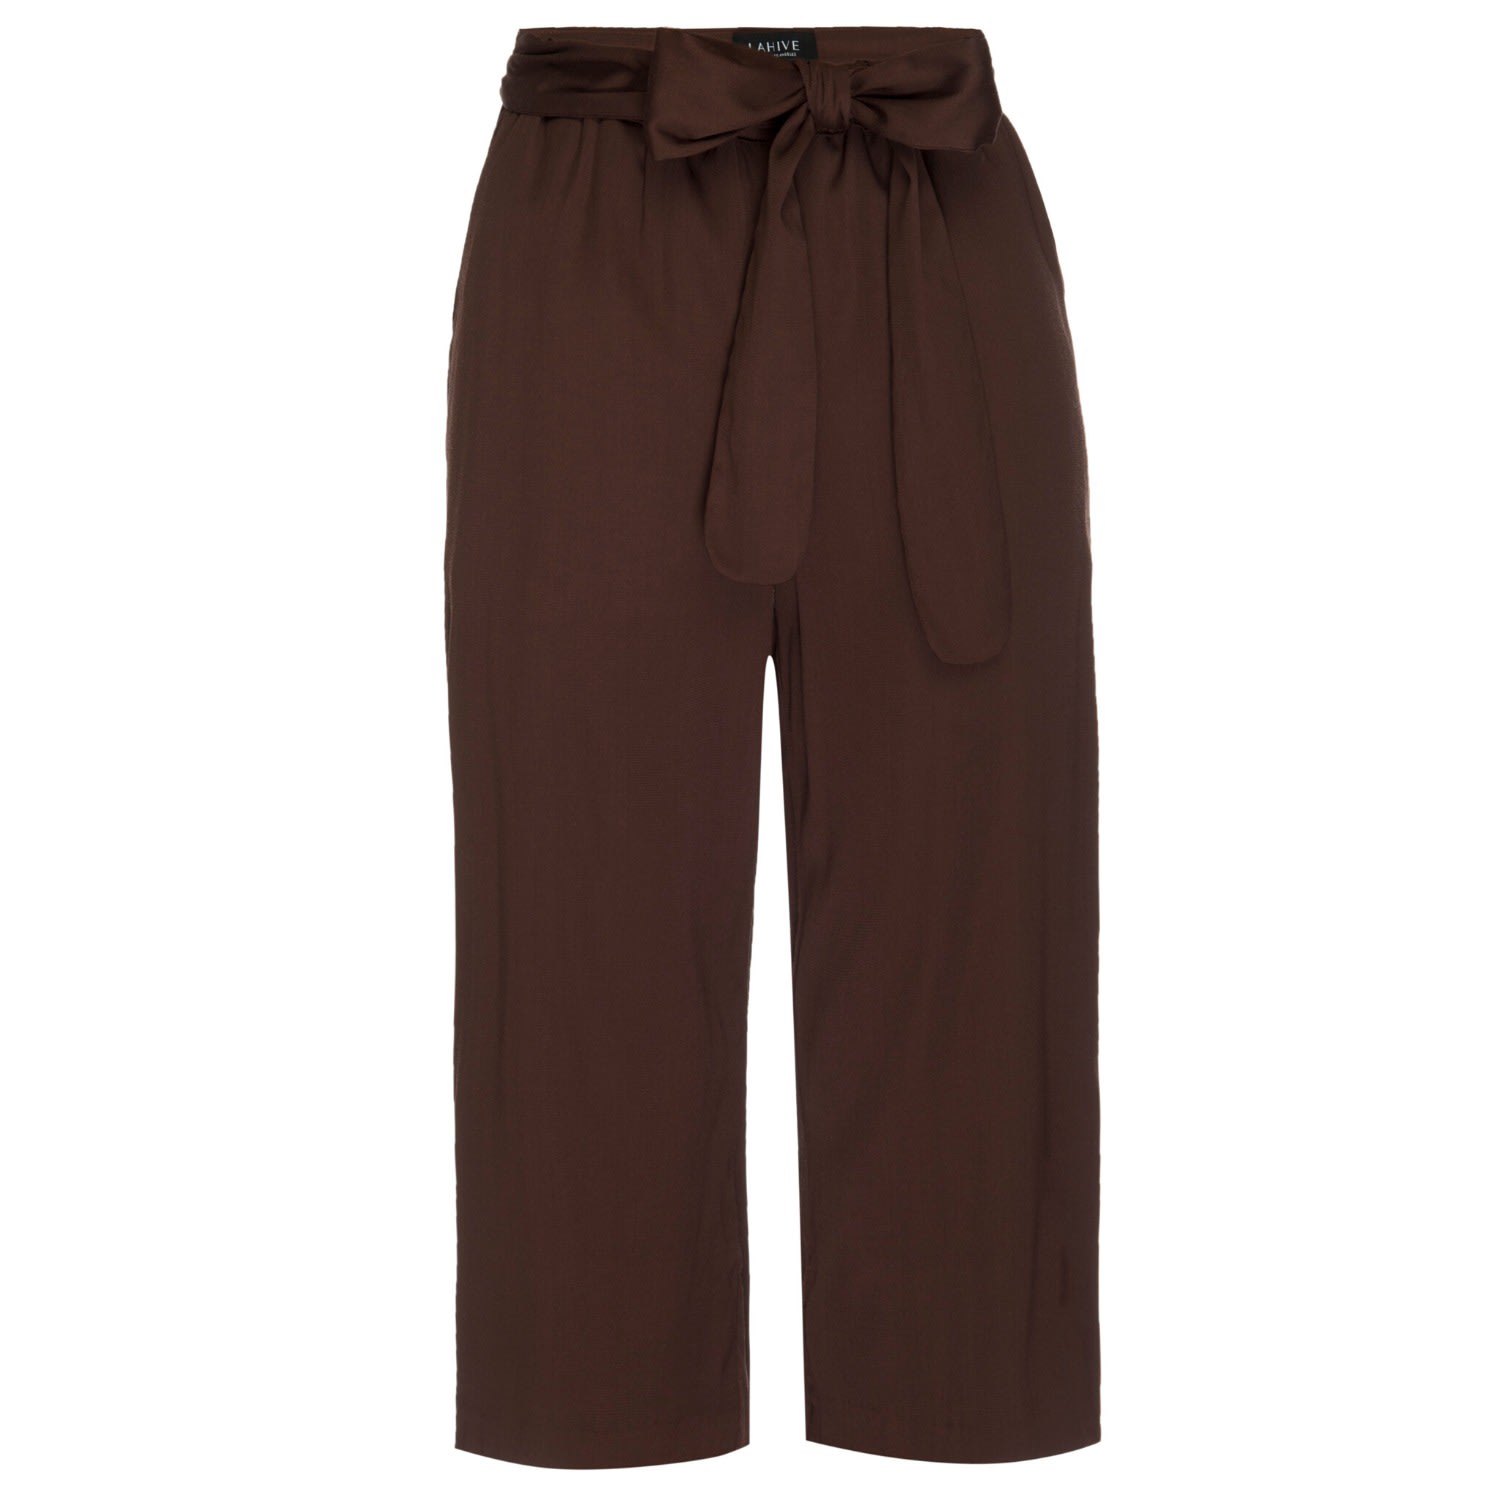 Lahive Women's Brown Lazzaro Cropped Palazzo Pant With Self Belt